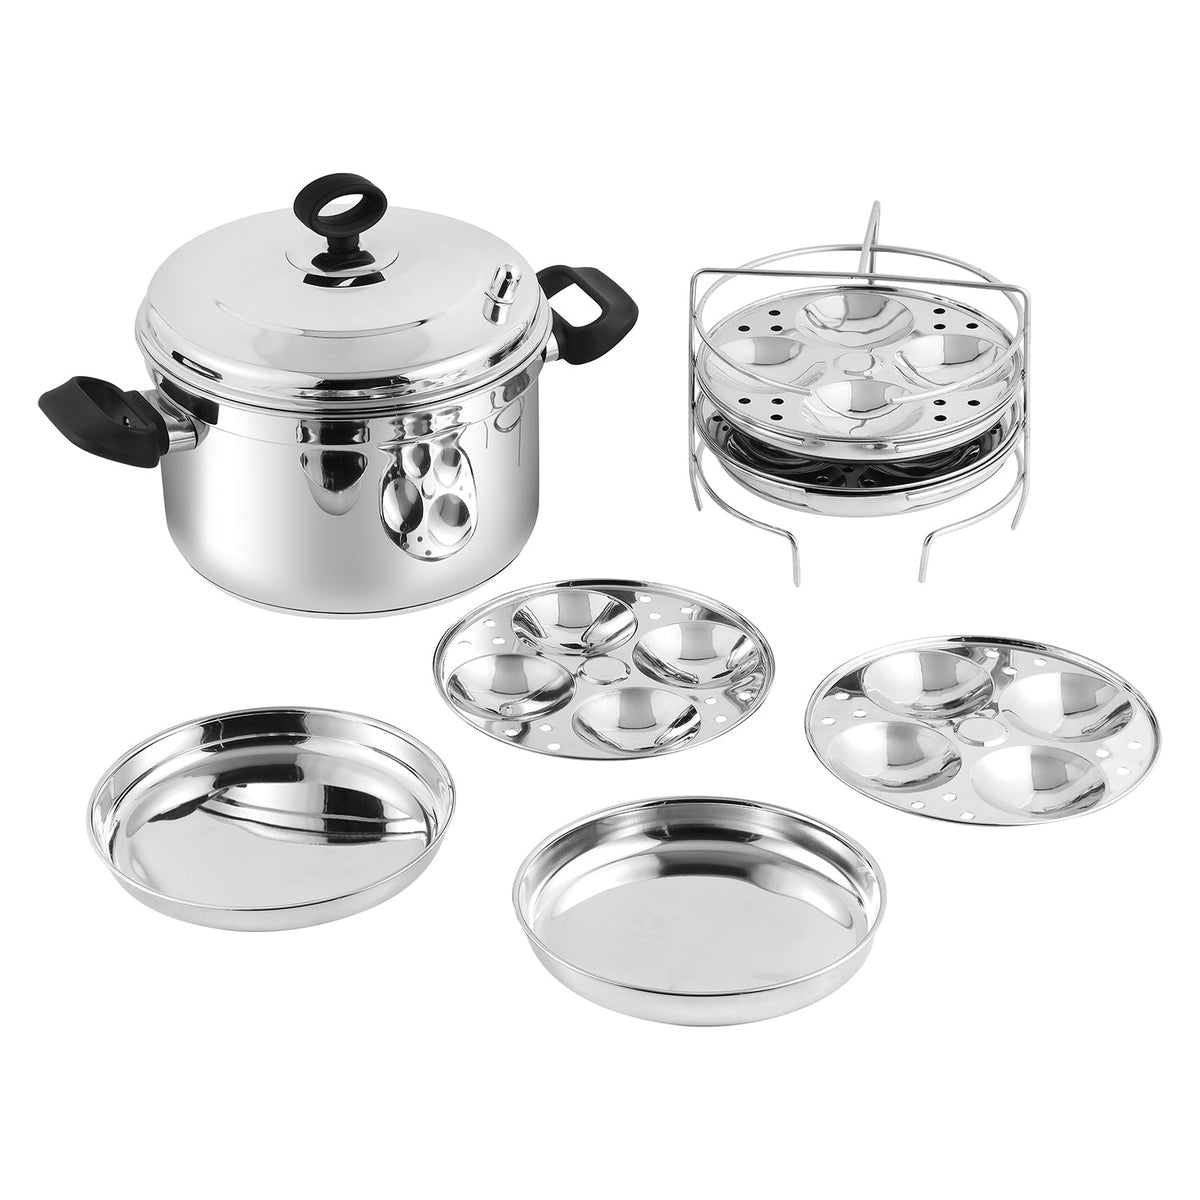 Large Stainless Steel Multi Pot - Induction Friendly